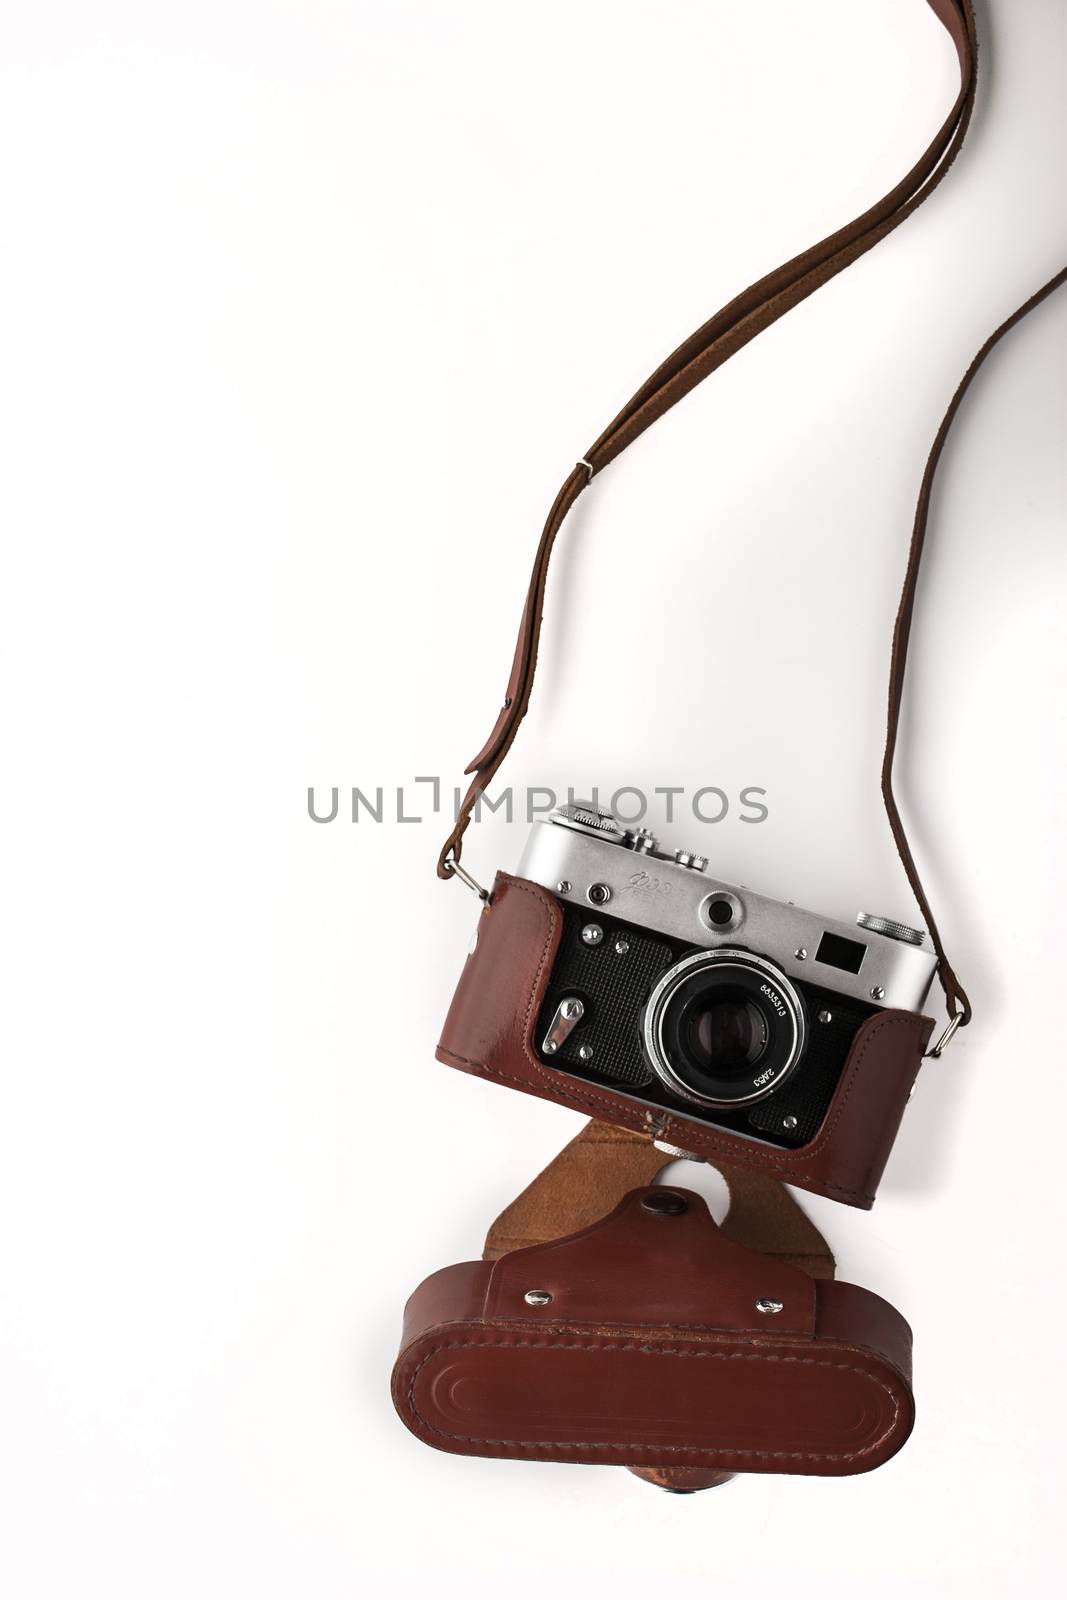 Old vintage camera  in the brown case on the white background vertical